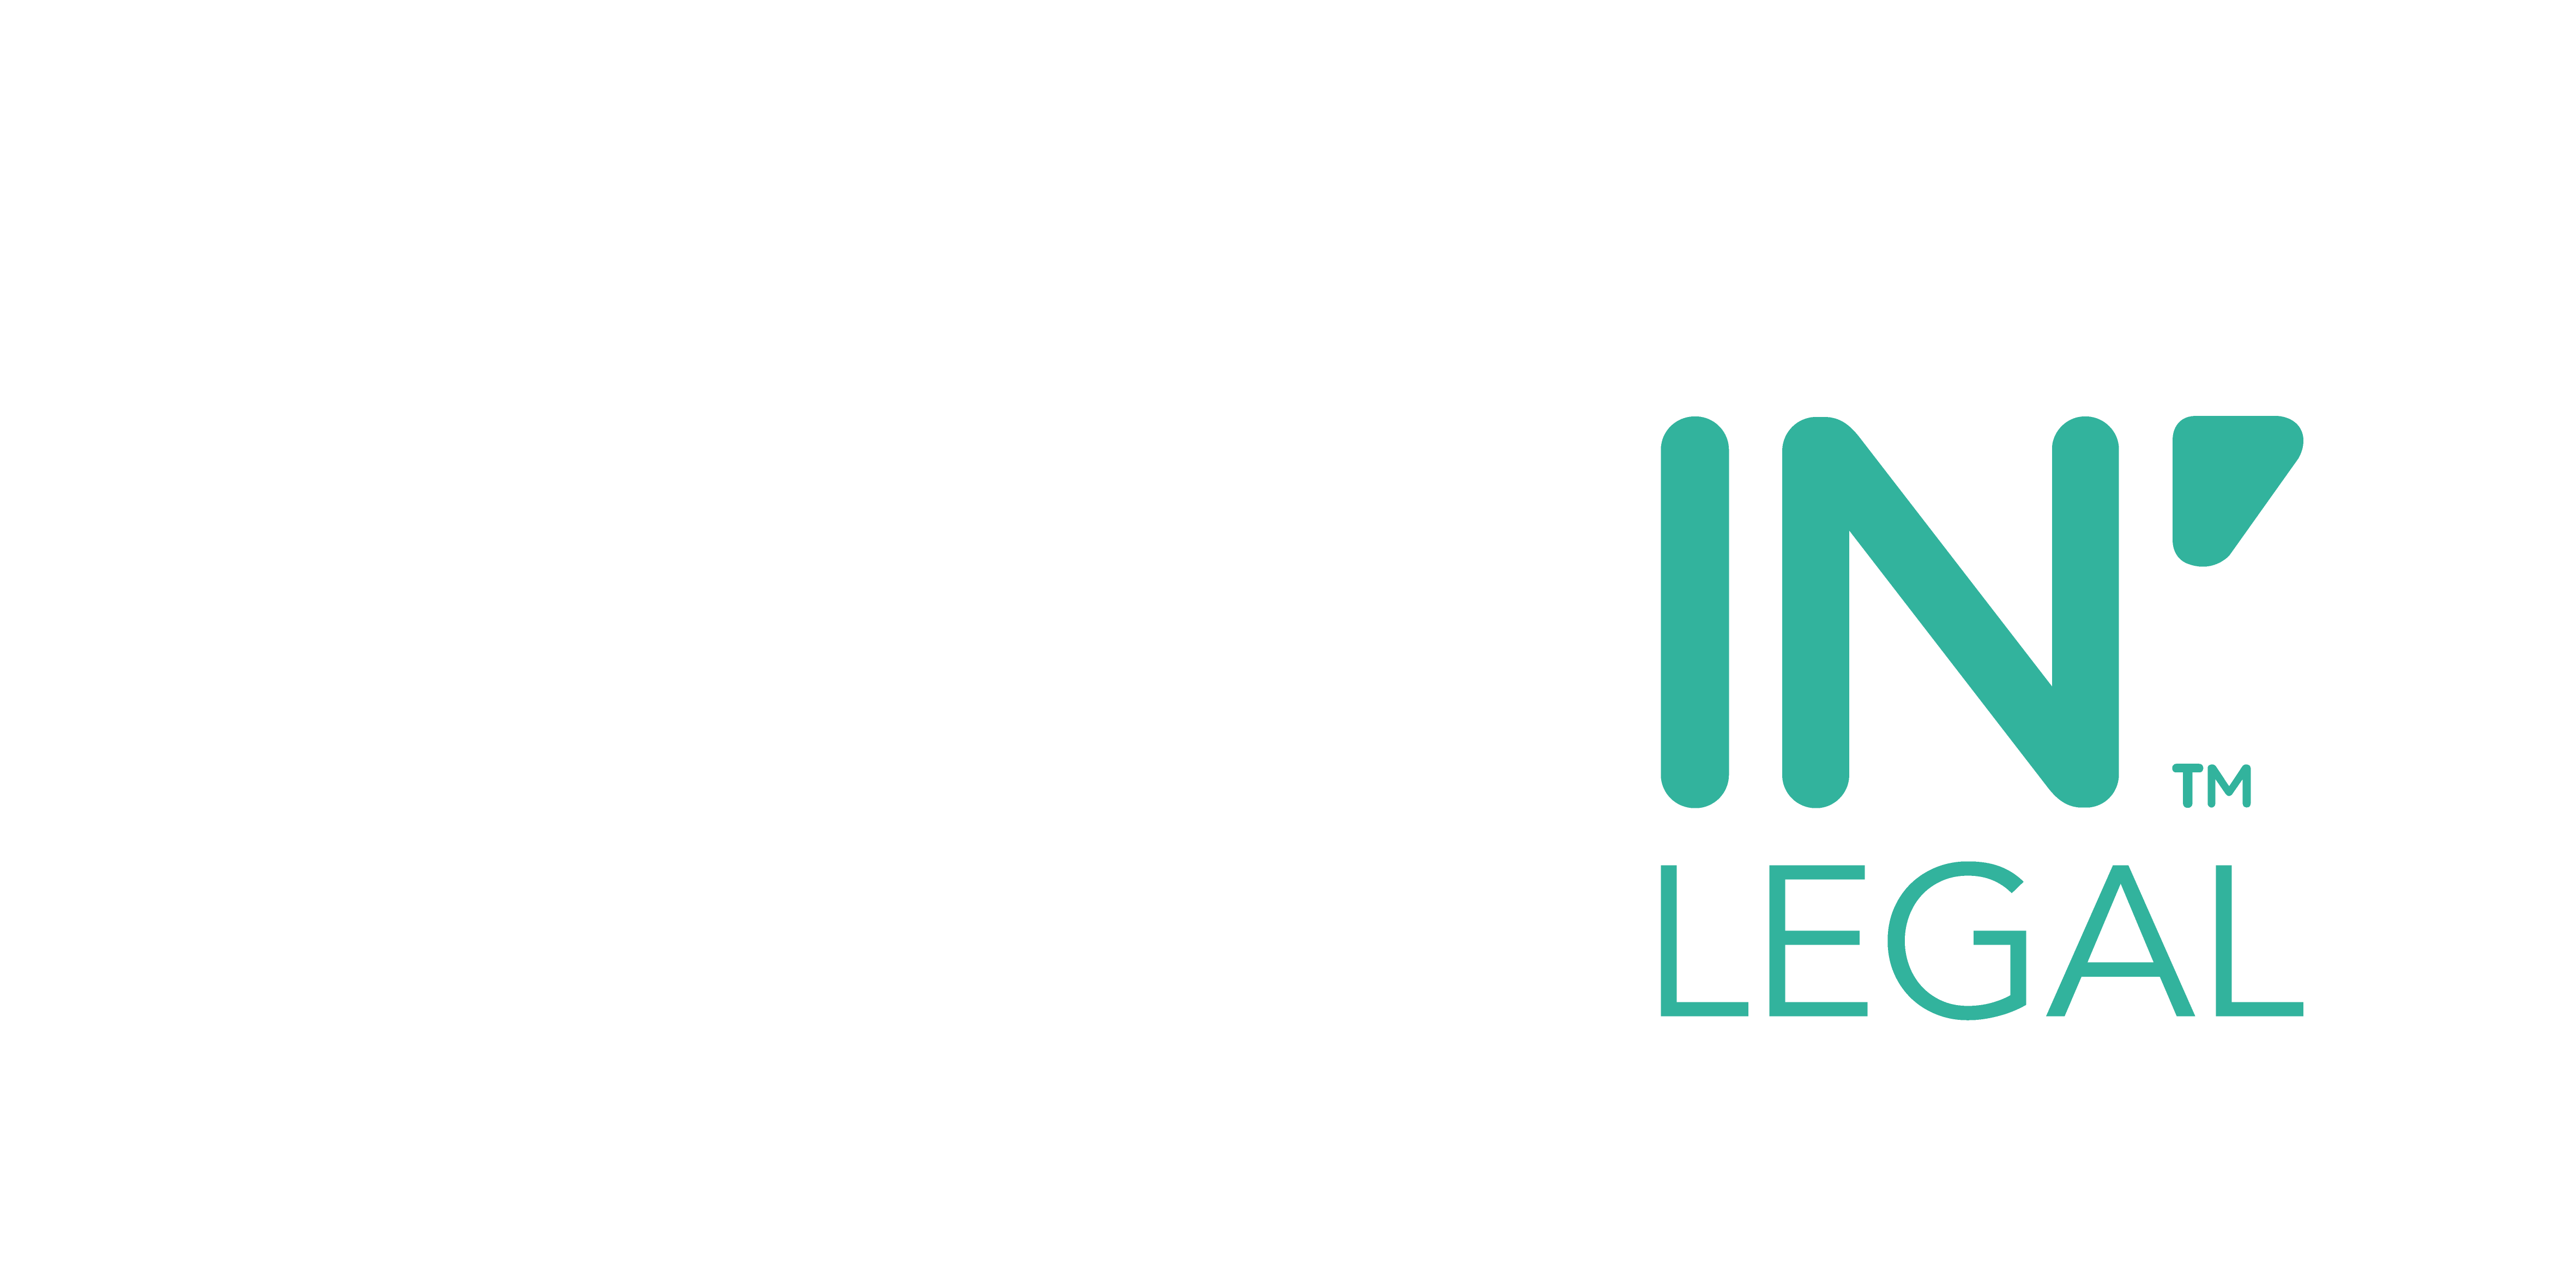 Movin_Legal_Logo_powered_by_Trans_for_Dark_background.png